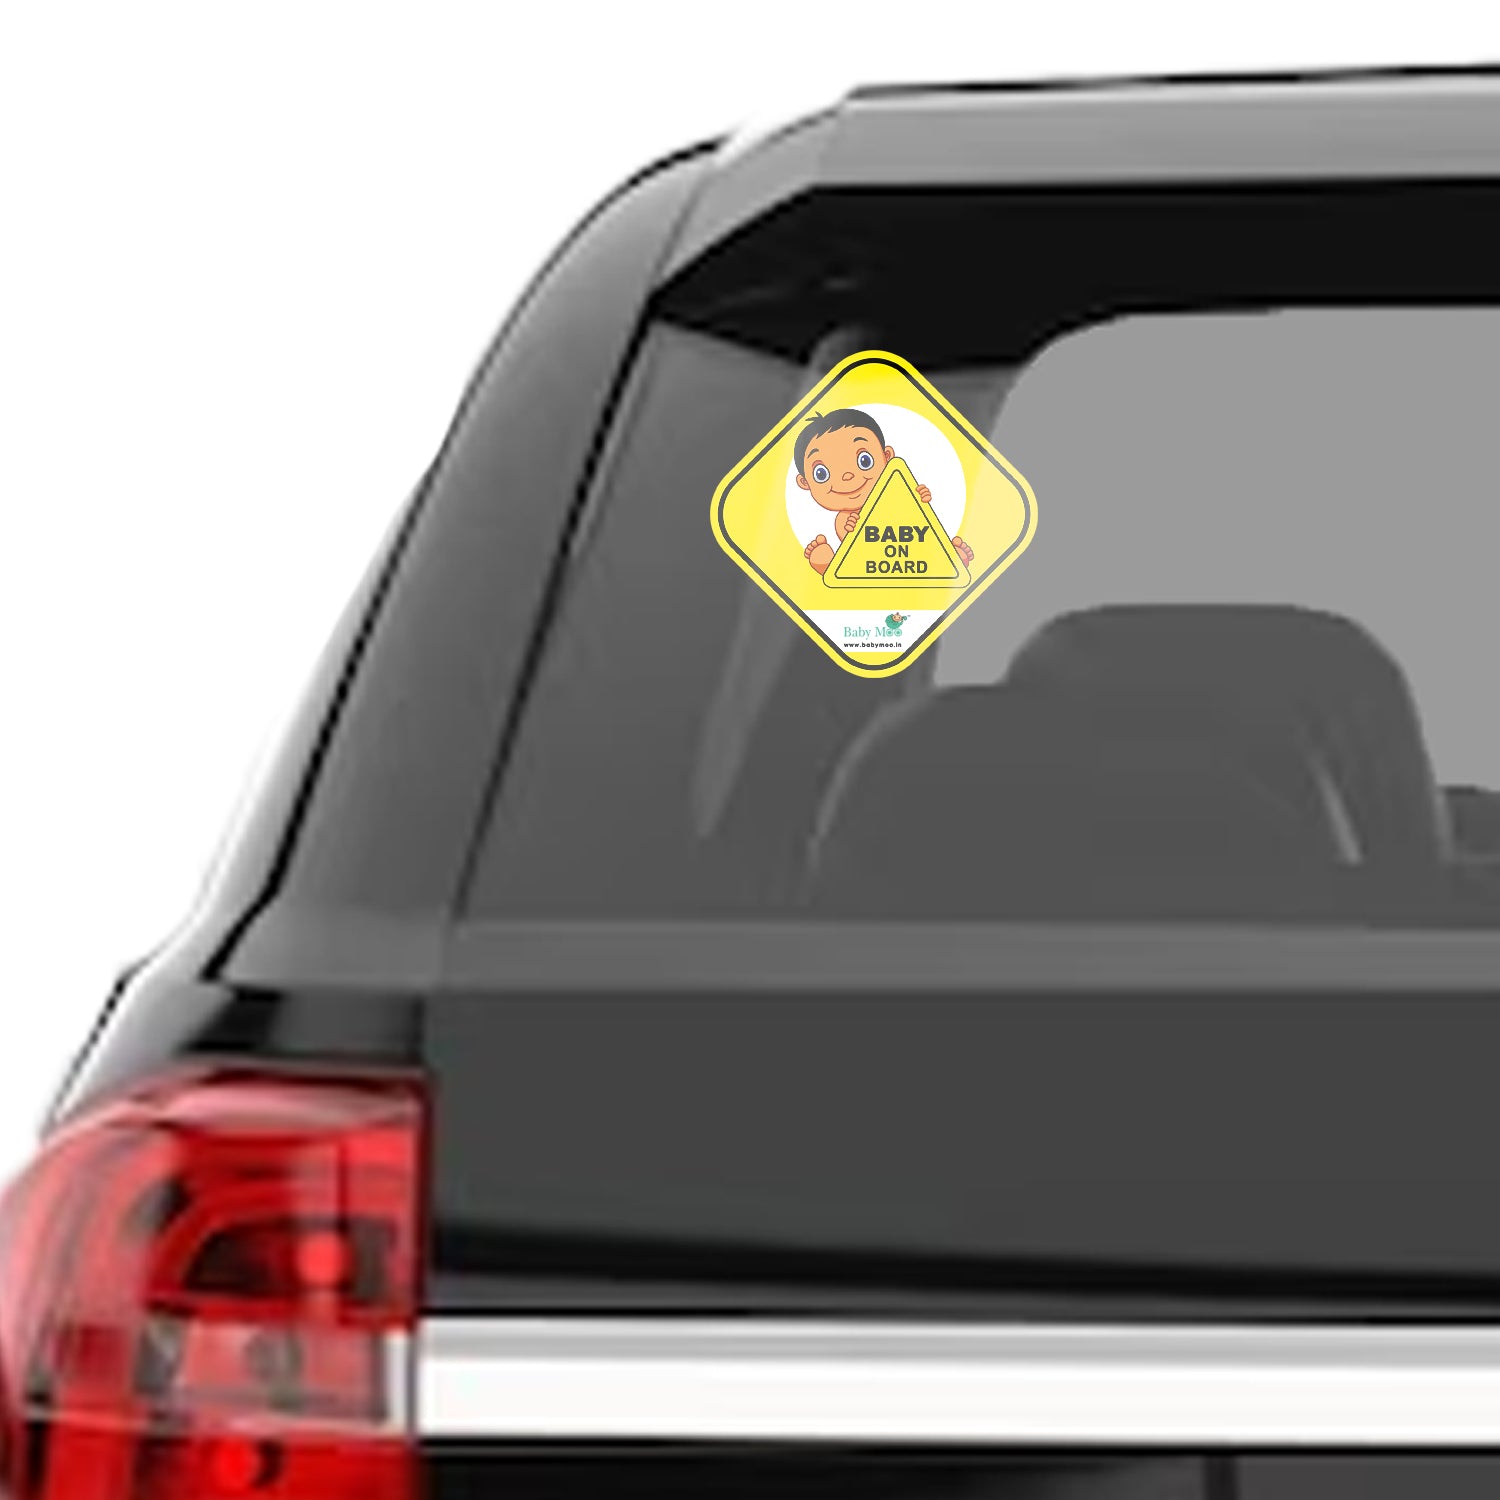 Baby Moo Kids Car Safety Sign Baby On Board With Suction Cup Clip 2 Pack - Yellow